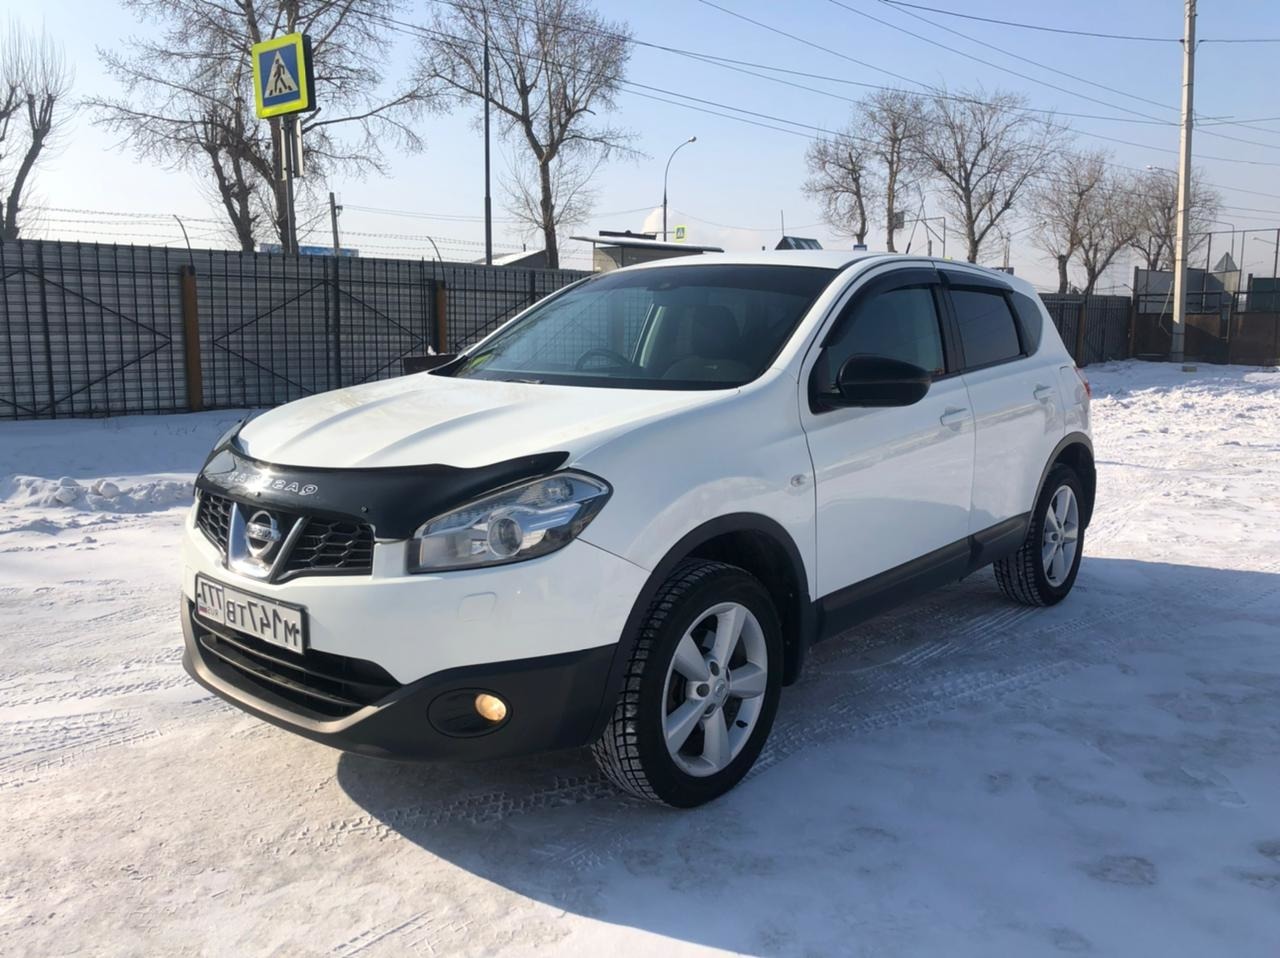 <span style="font-weight: bold;">Nissan Qashqai 2011</span><br>